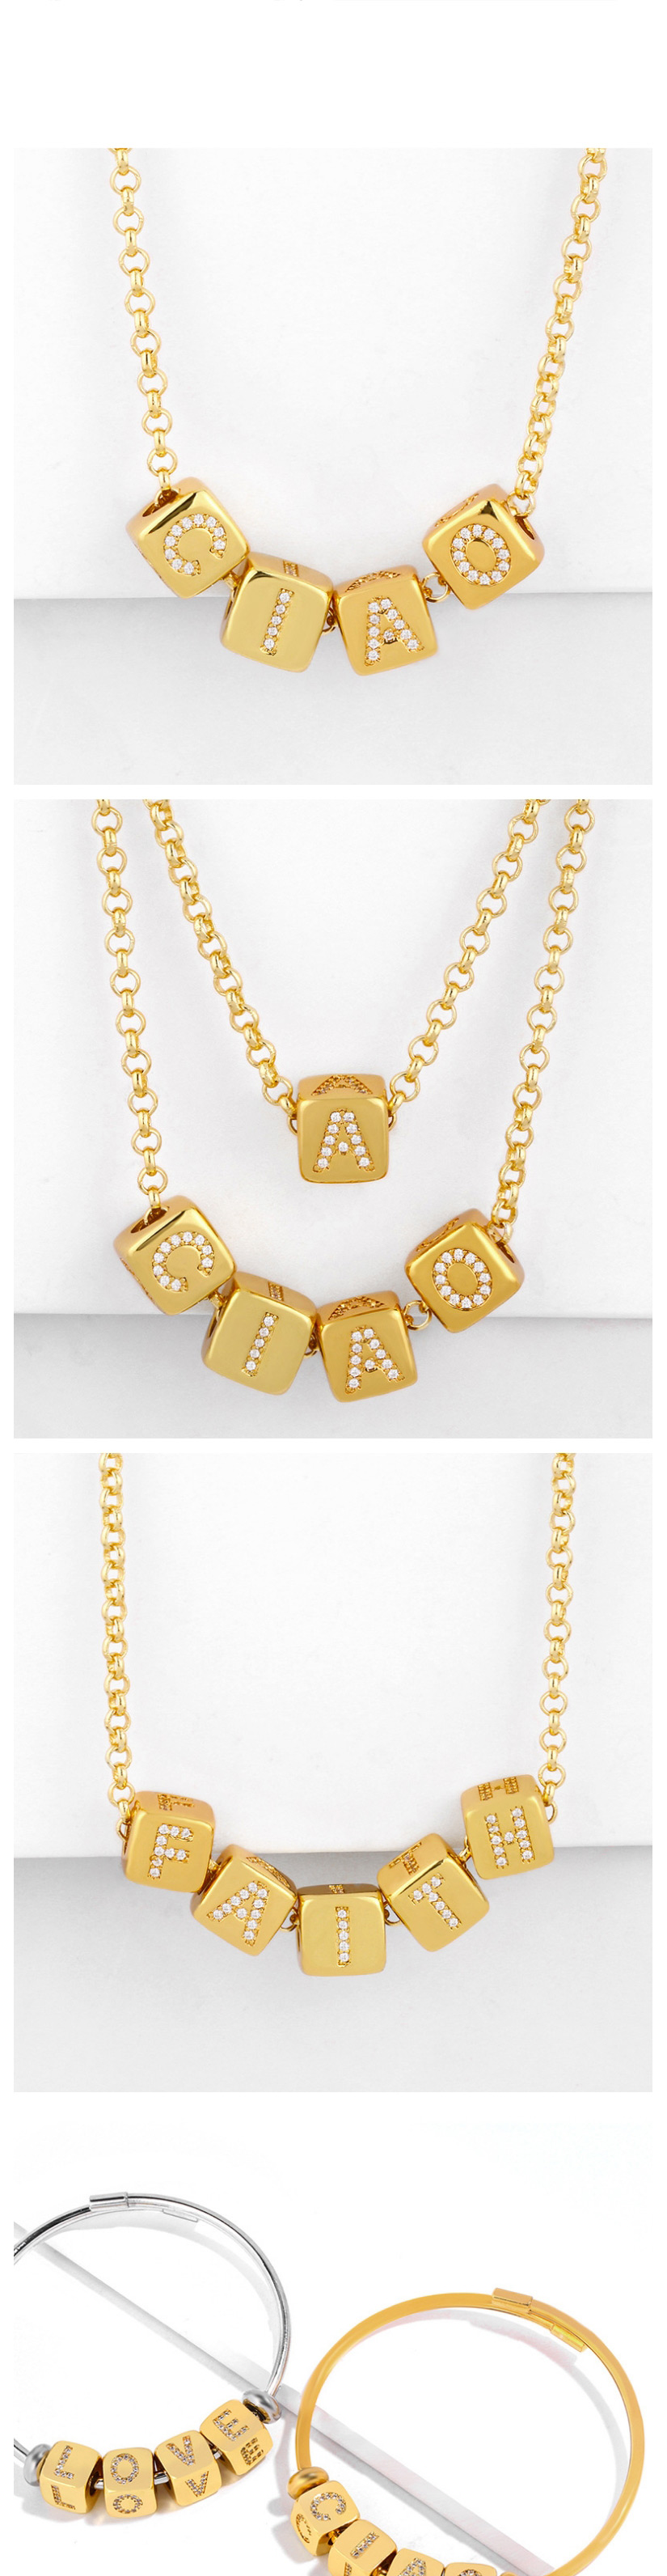 Fashion Chain (55 + 5) Alloy Hollow Chain Necklace,Necklaces